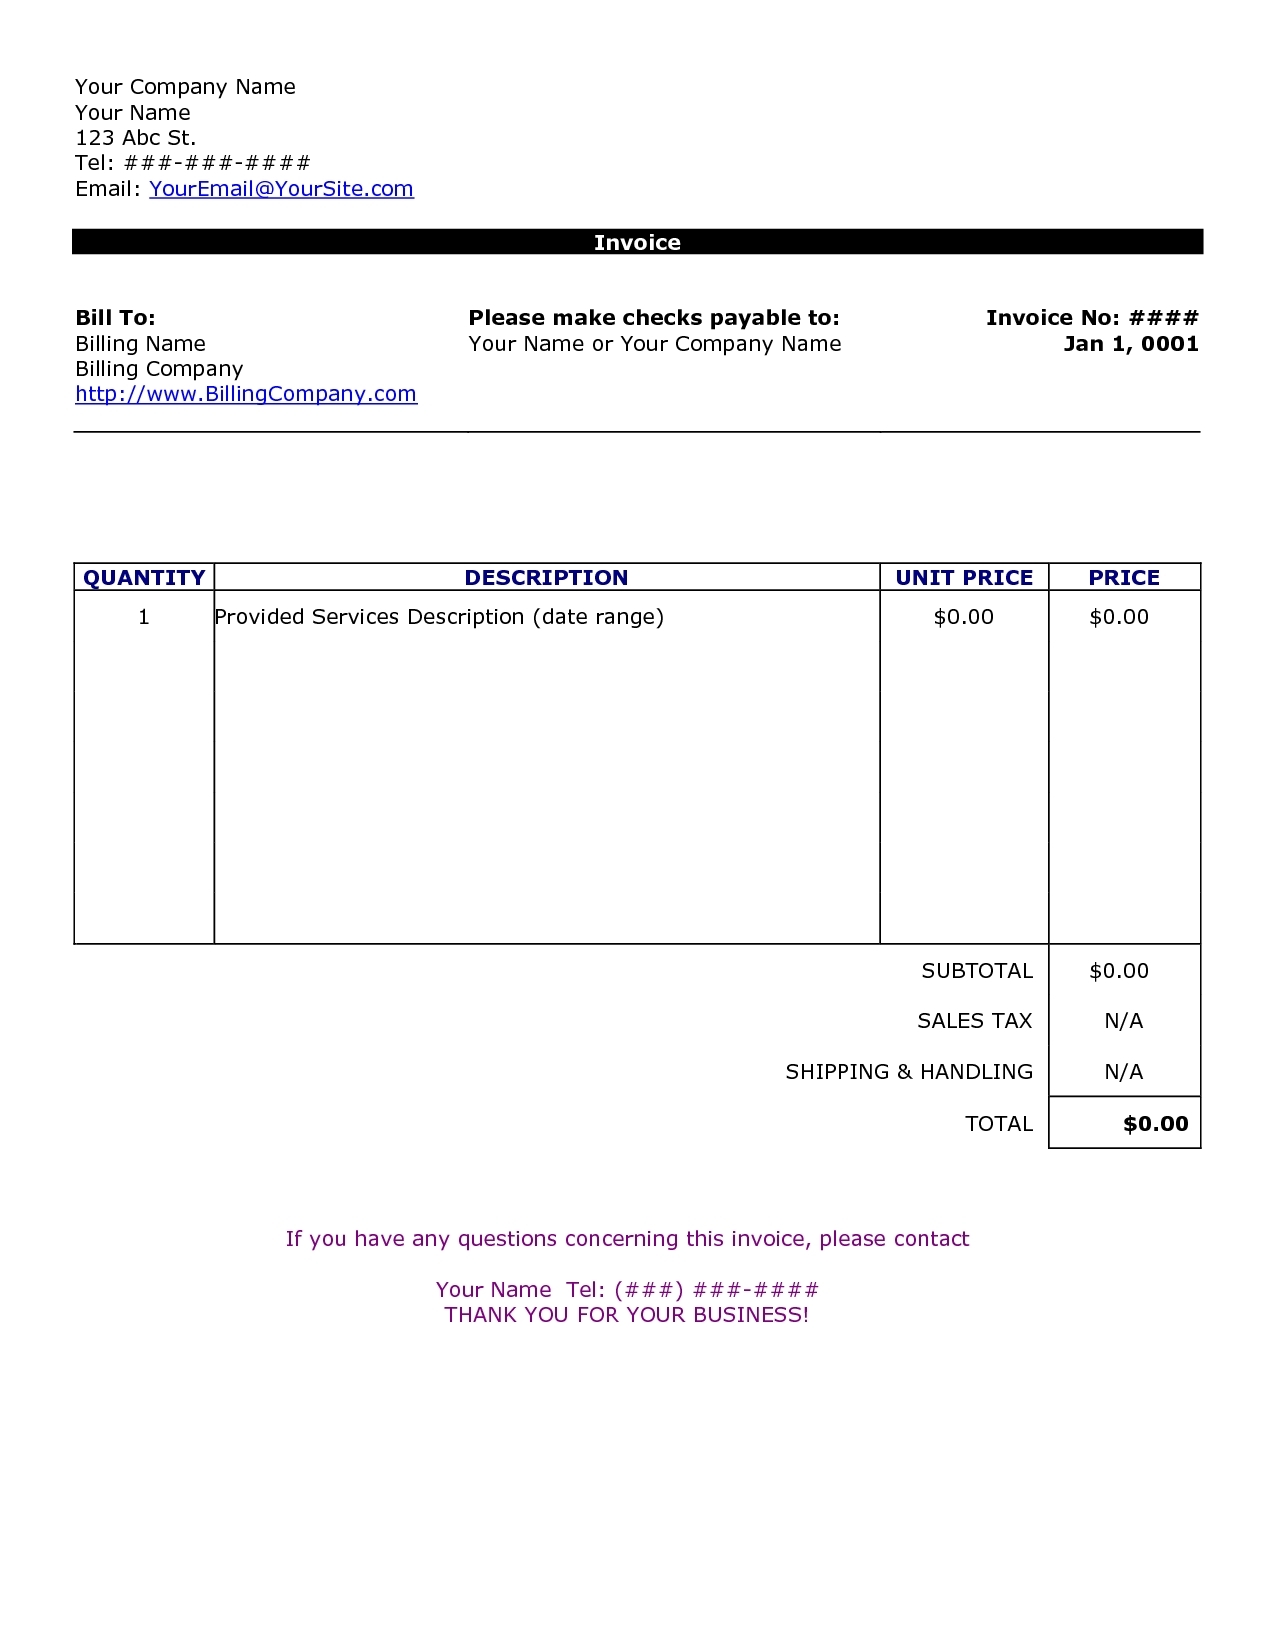 format of an invoice free invoice templates for word excel open free invoice templates word